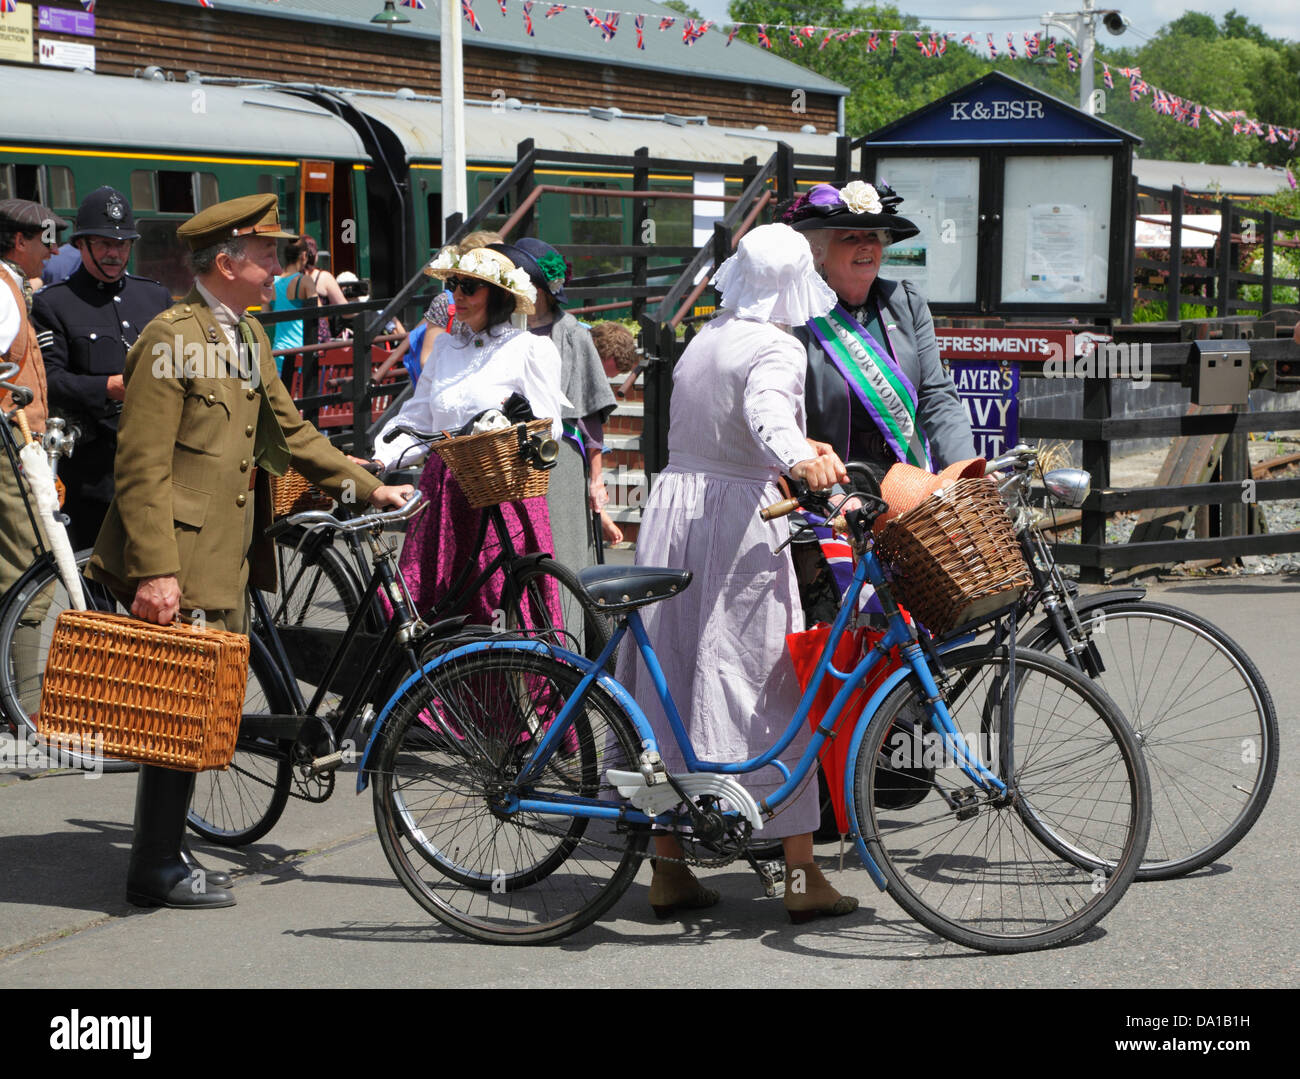 People in period costume with vintage bicycles arriving at Tenterden station for re-enactment of life in WW1, Kent, UK, GB Stock Photo